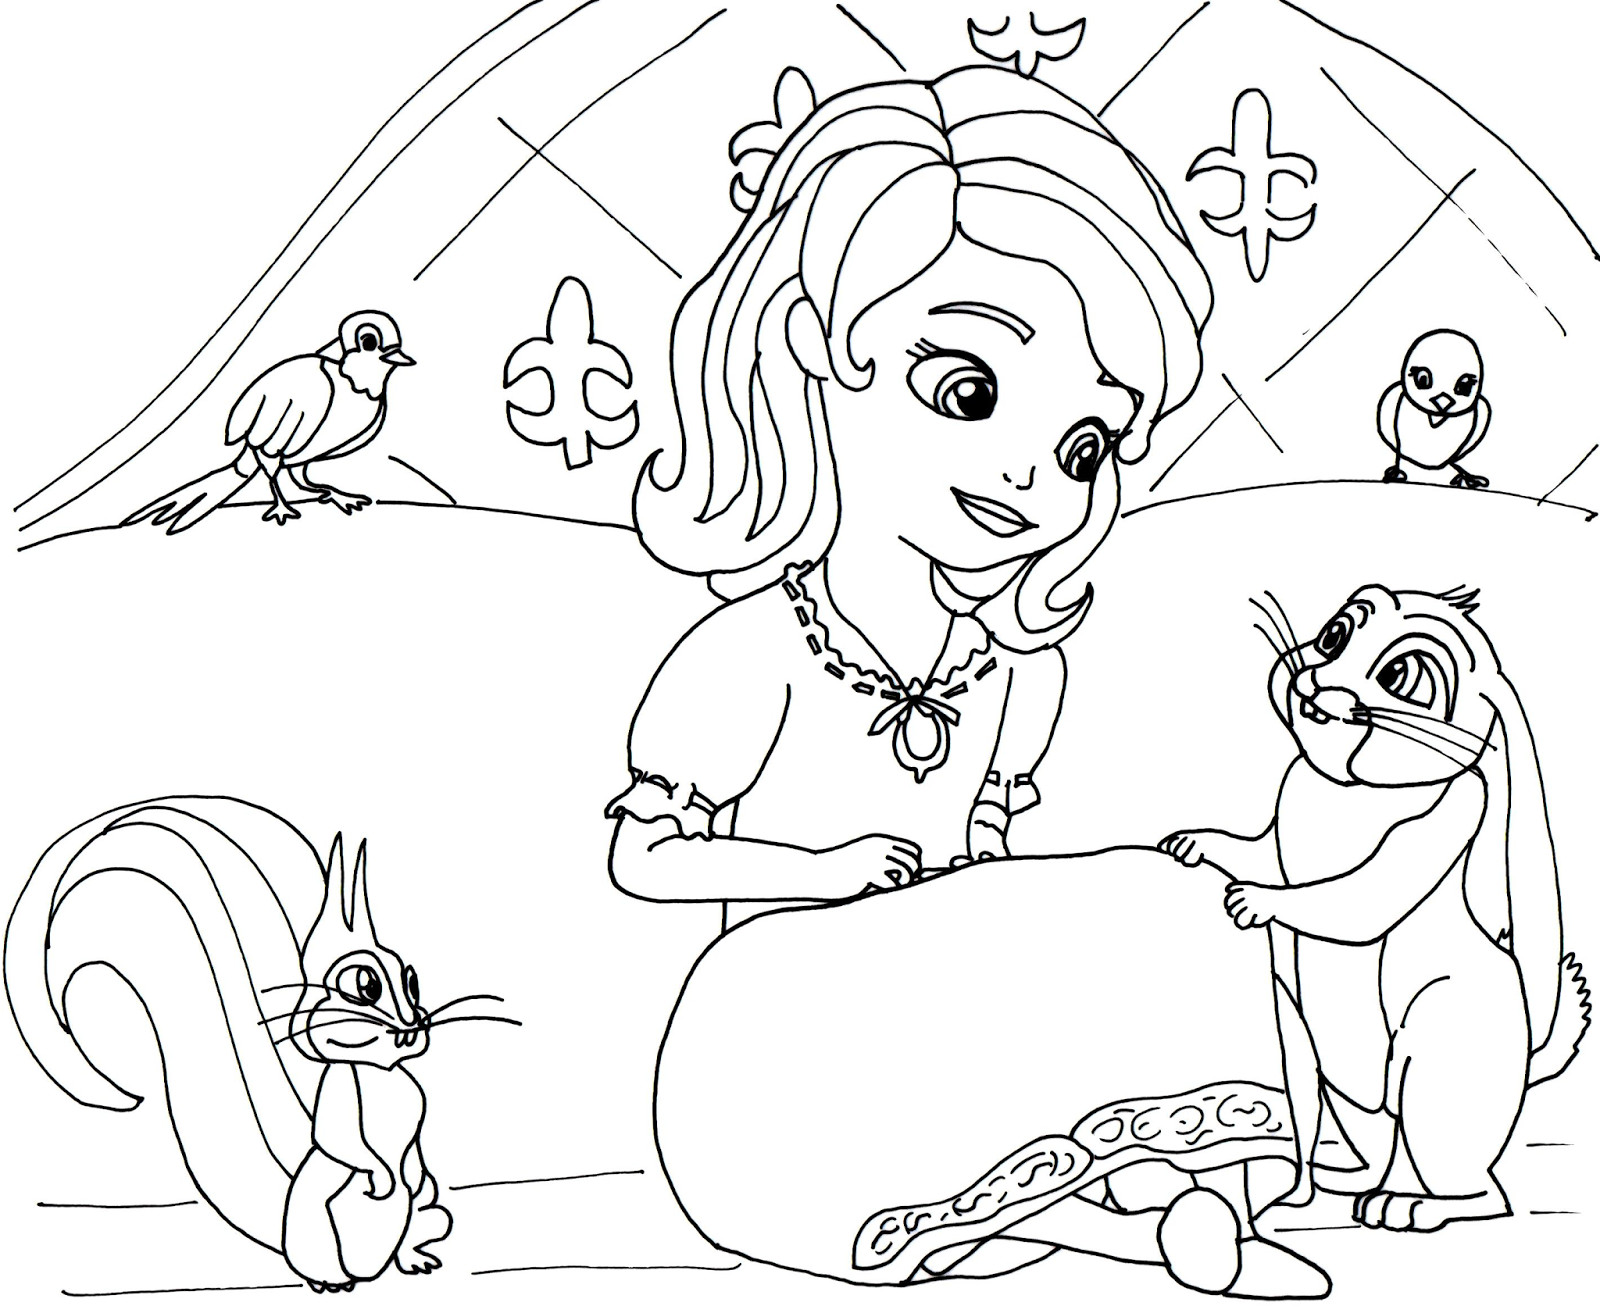 Sofia The First Coloring Pages
 Sofia The First Coloring Page For Kids Coloring Draw 8707